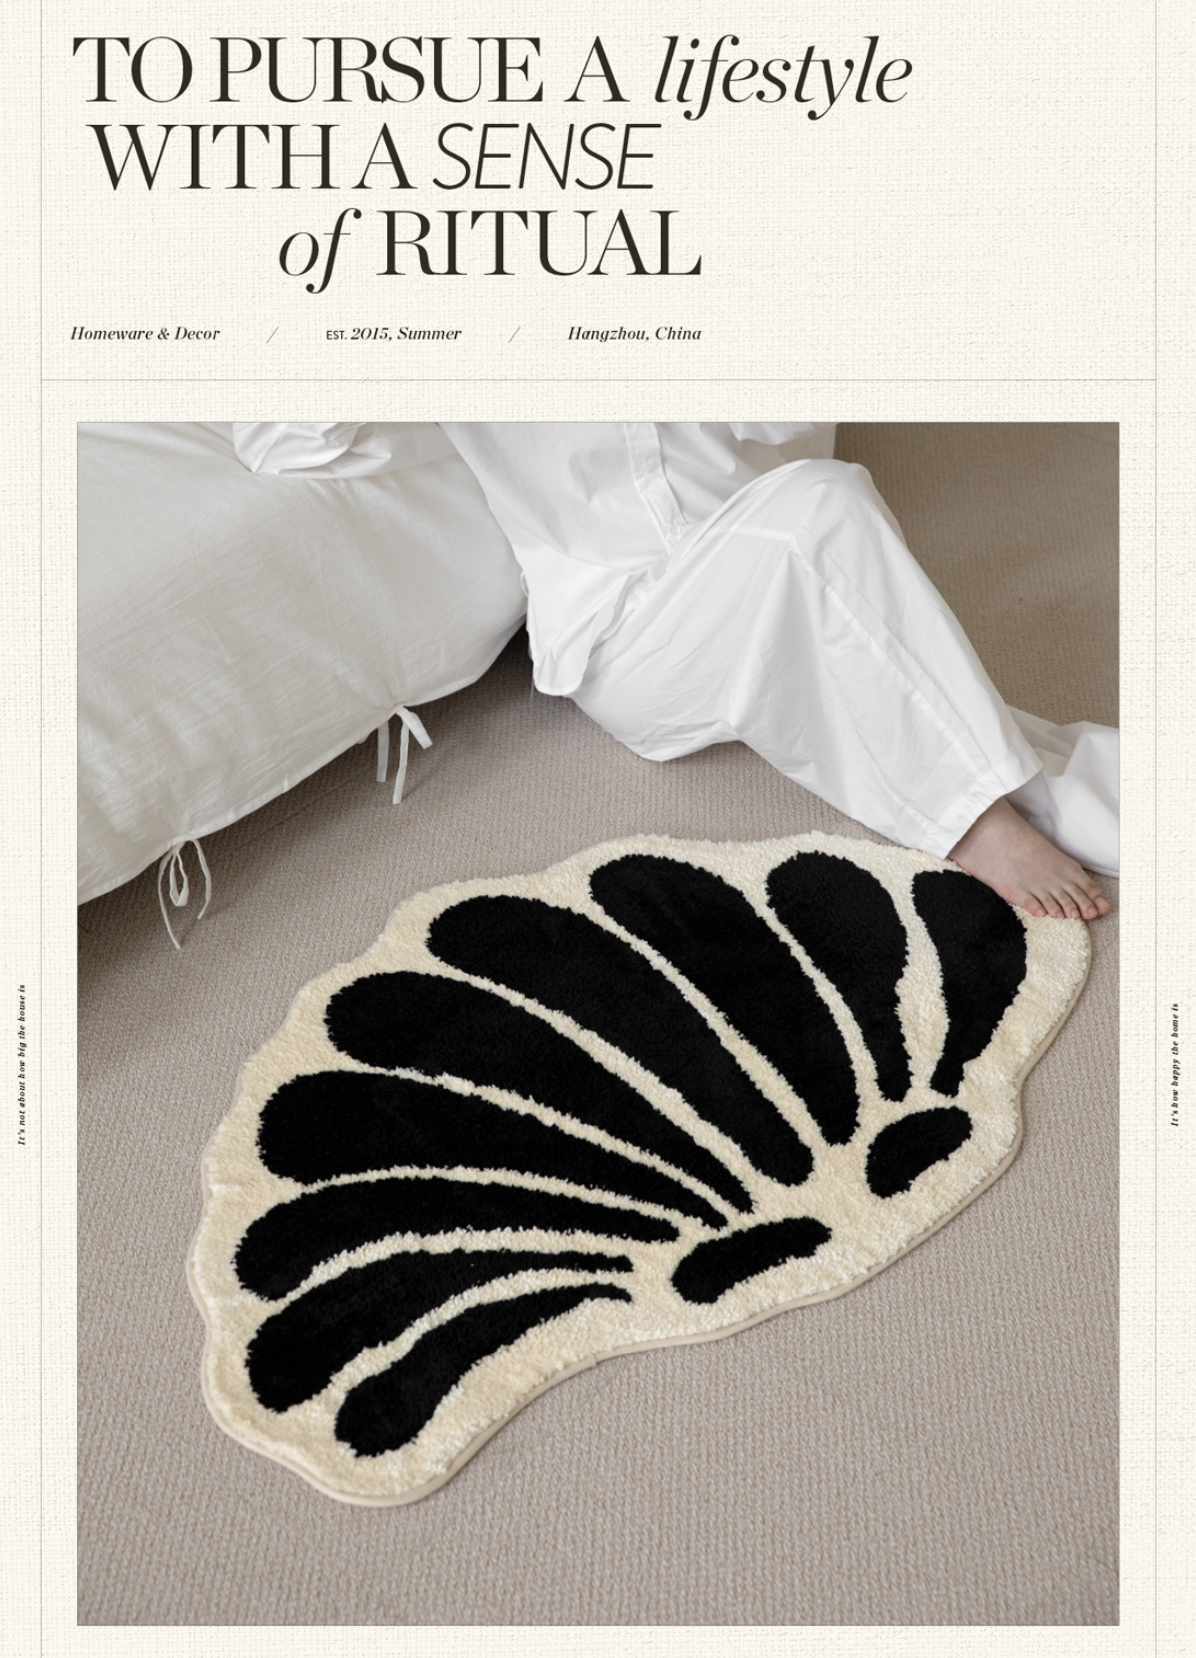 Nordic simple style cream and ivory color tone black and white tufted rug series, by A Bit Sleepy homedecor concept store